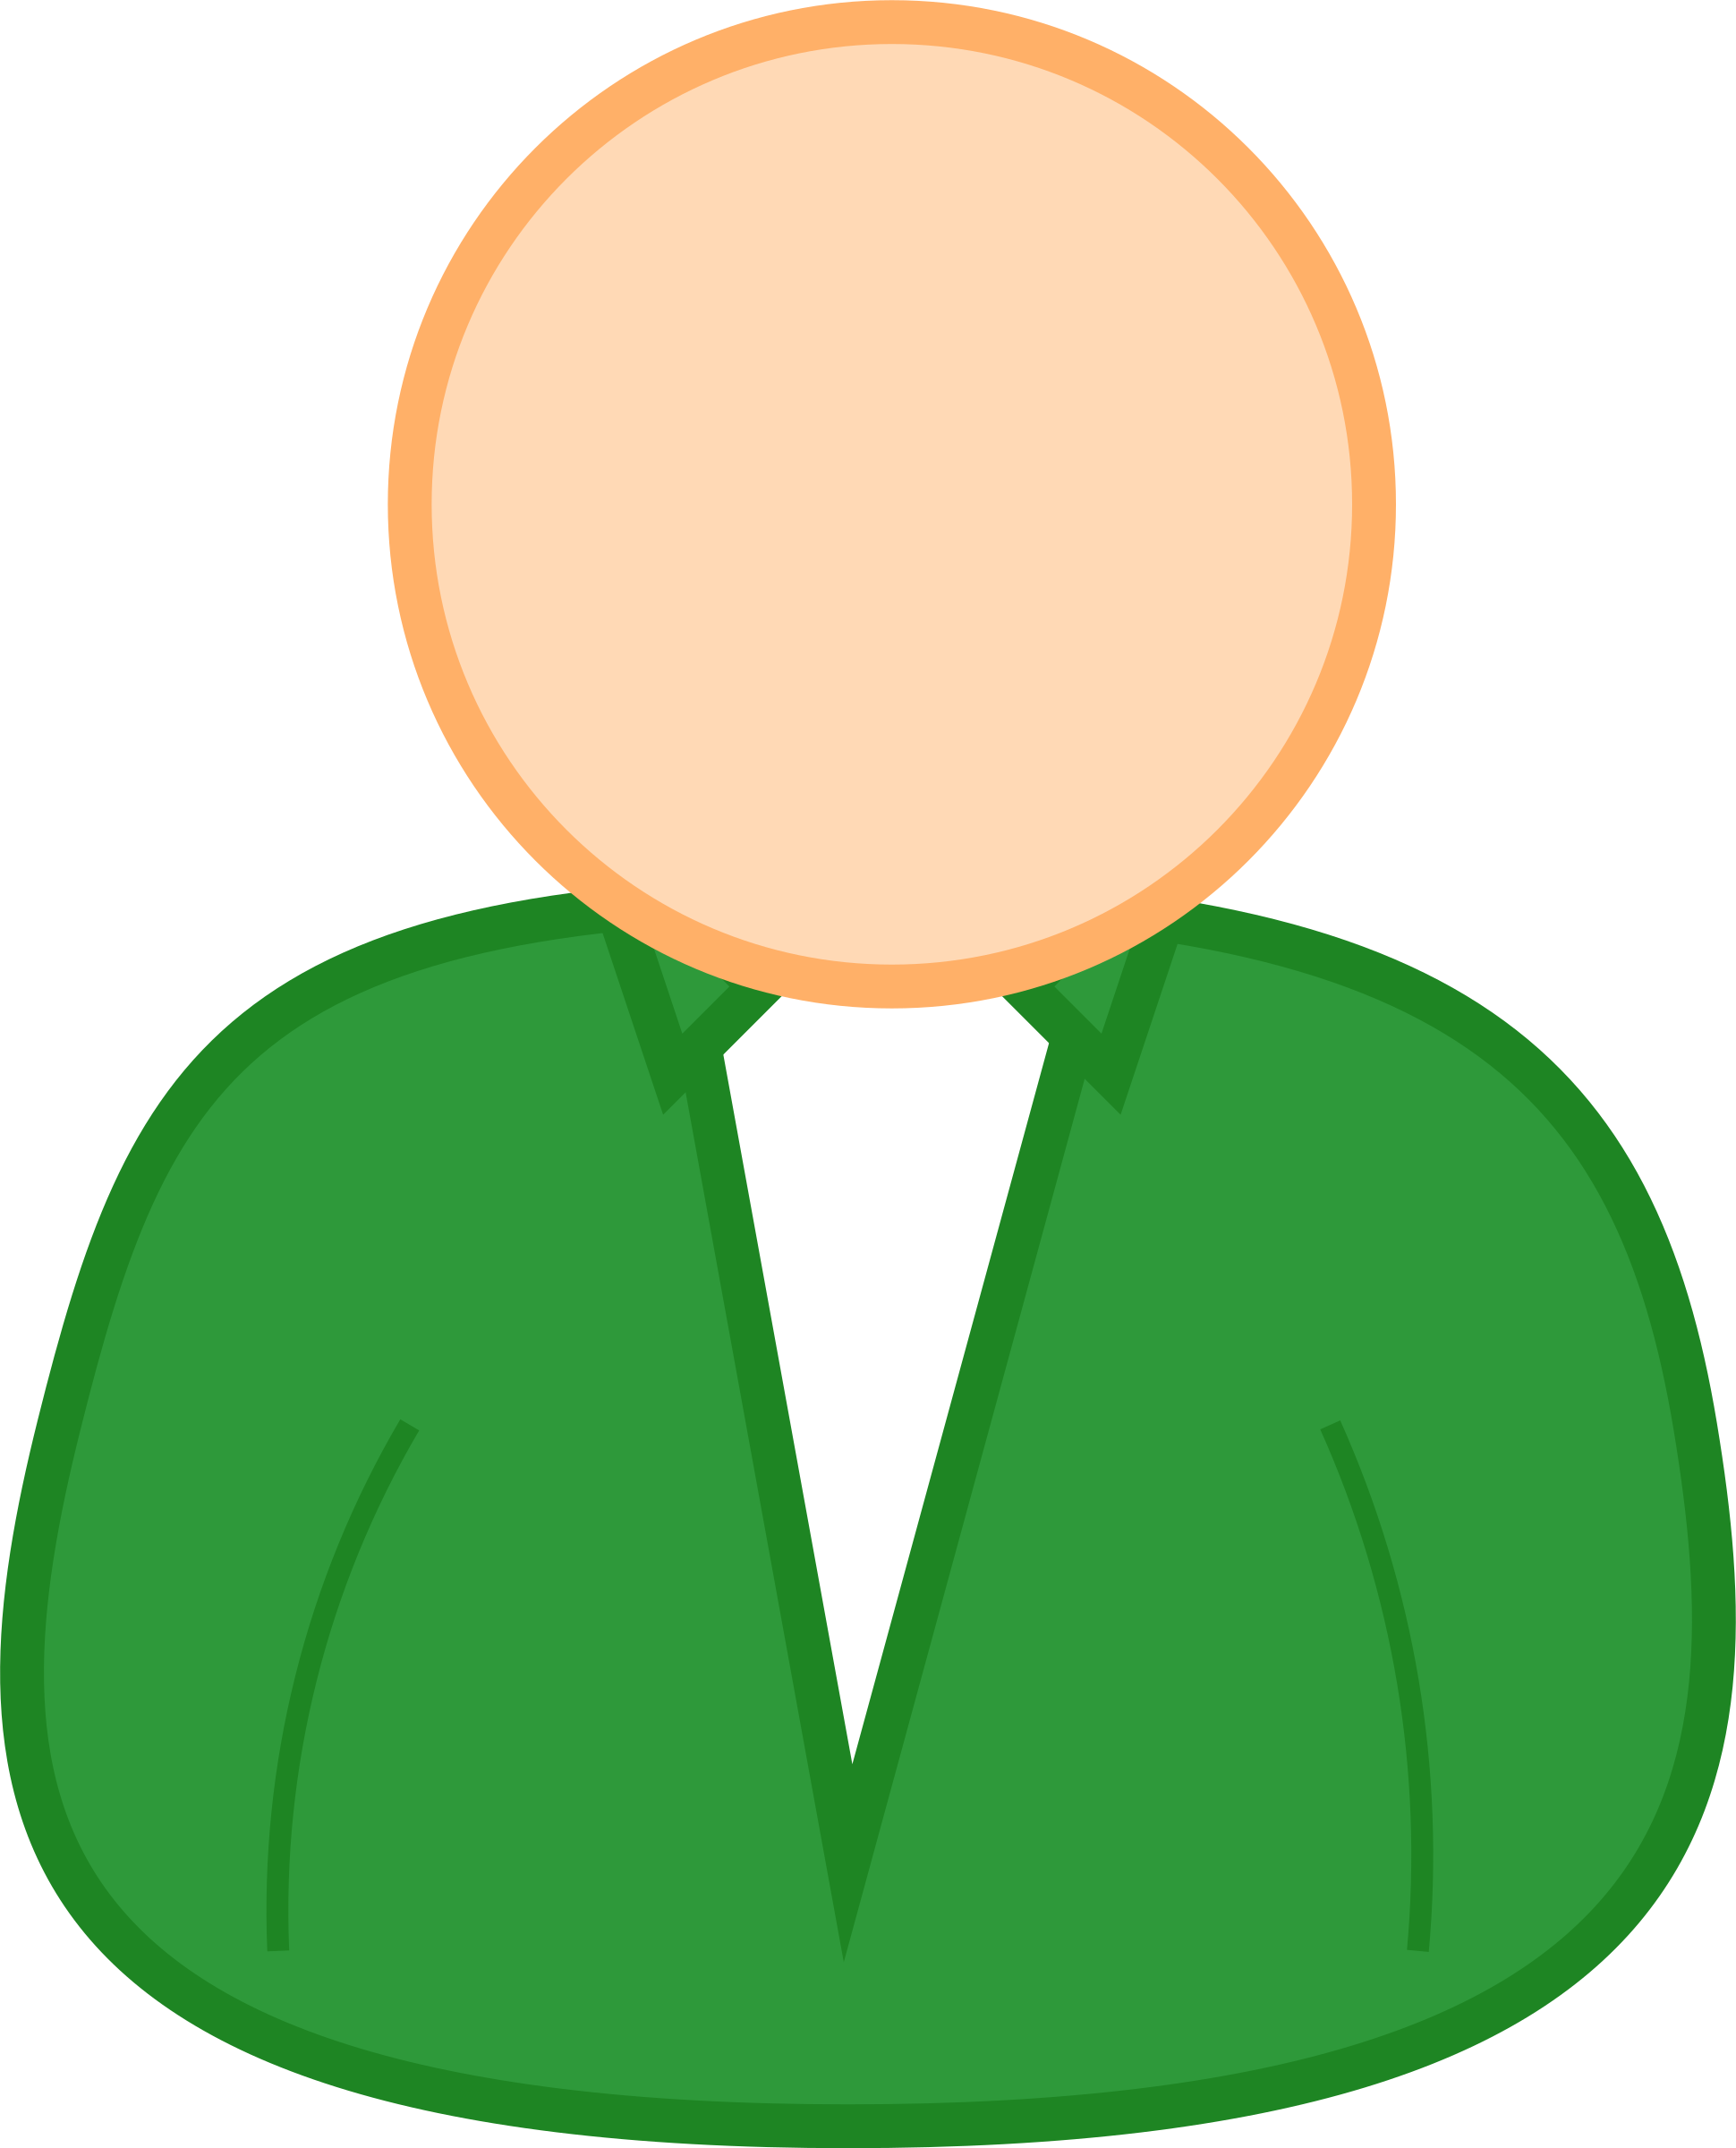 Big Image - Clipart Of Green Person (1940x2400)